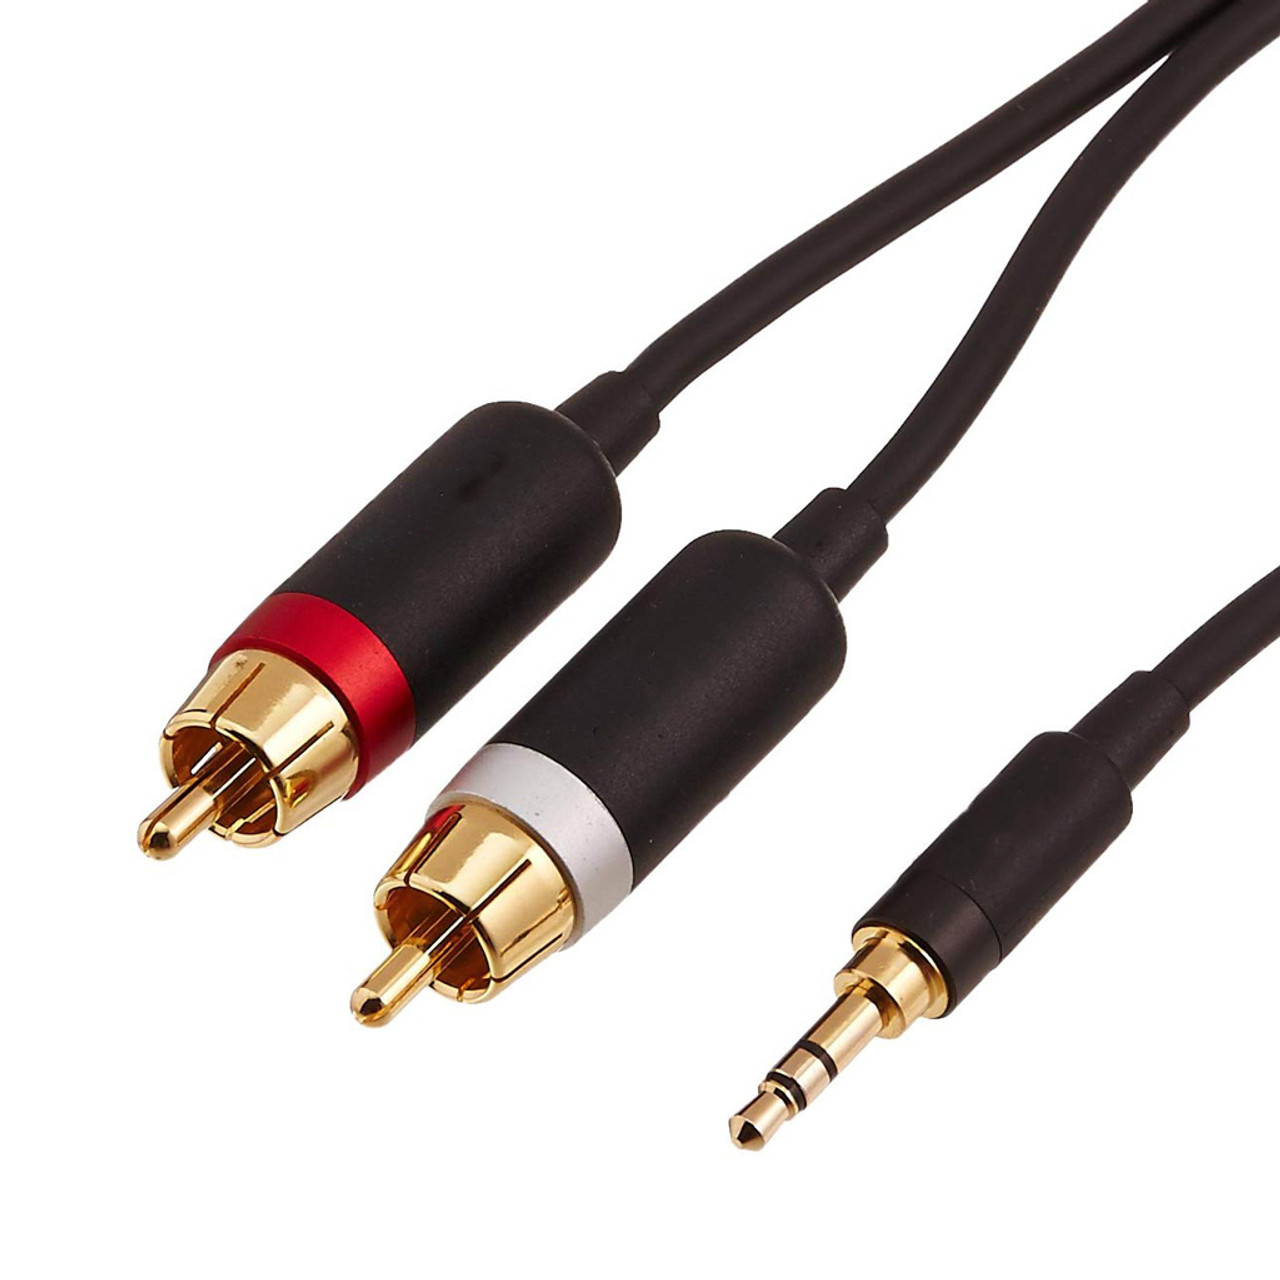 Cable 3.5mm to 2-Male RCA Adapter Audio Stereo Cable